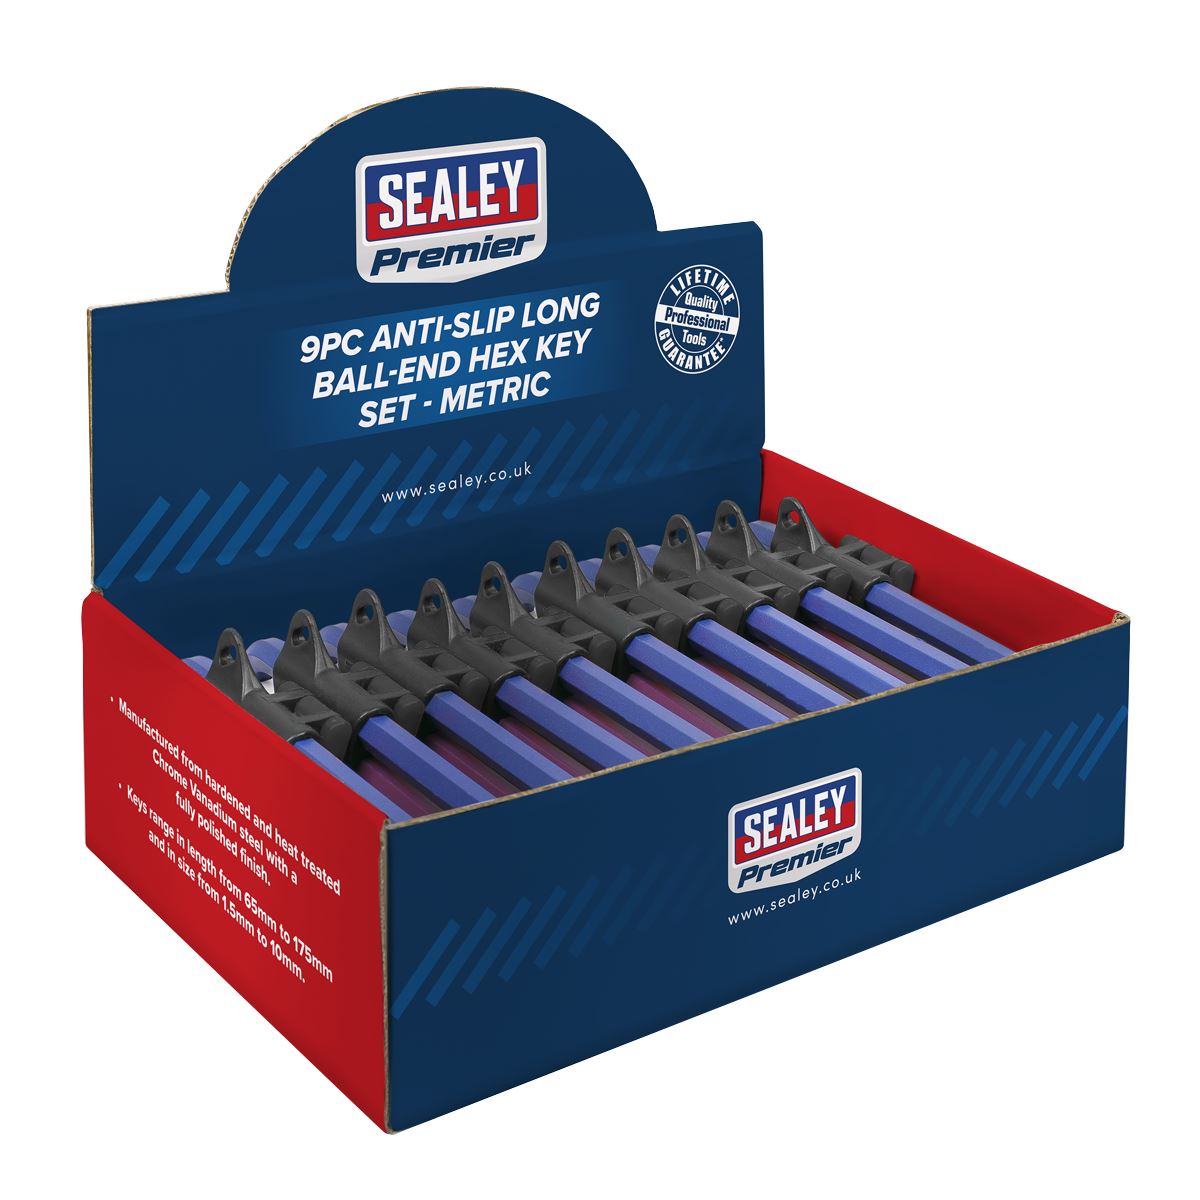 Sealey Premier Ball-End Hex Key Set 9pc Colour-Coded Long Metric - Display Box of 10